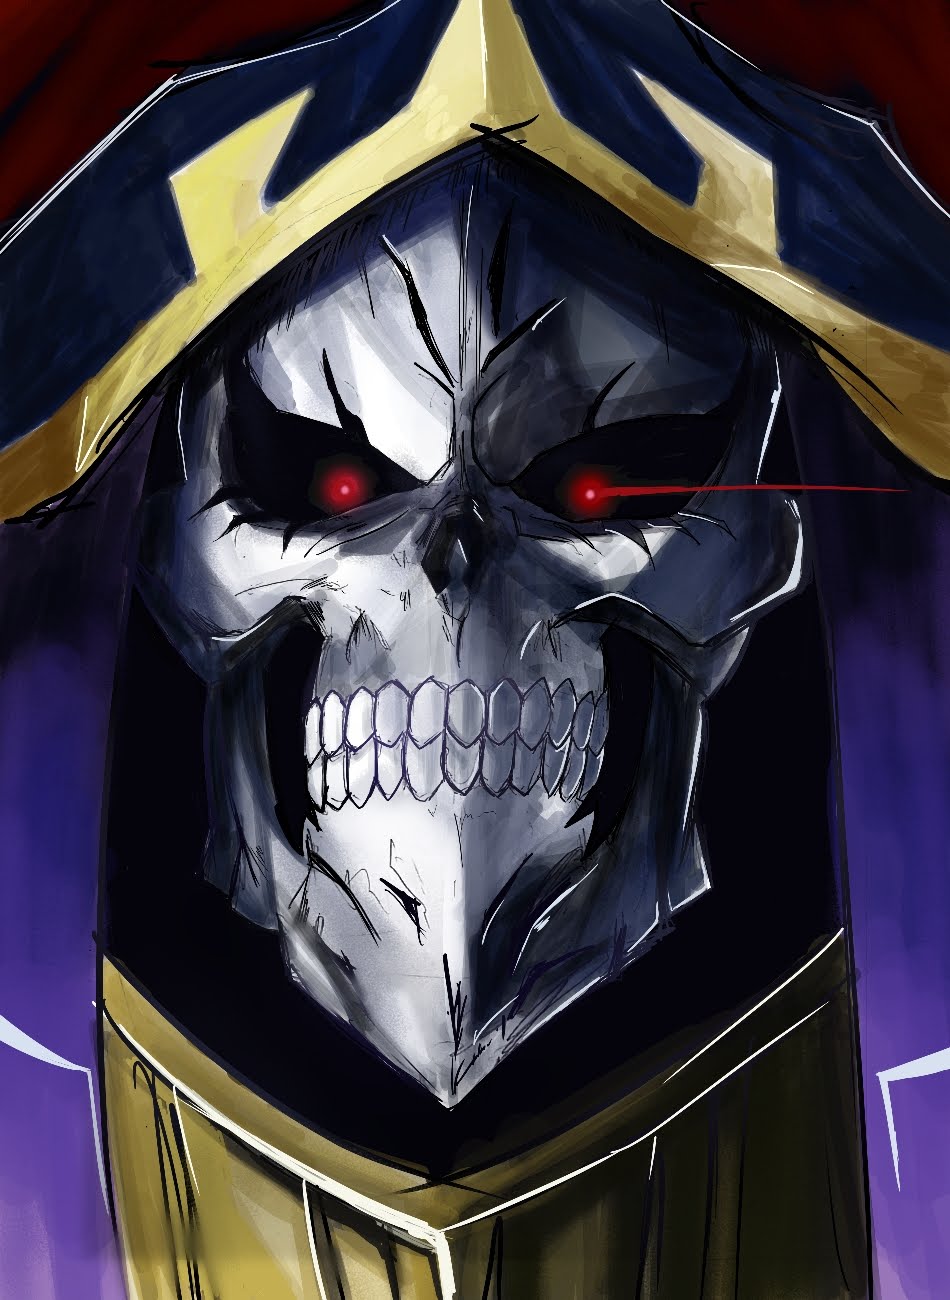 Overlord Volume 10 Where Overlord V10 Drama Cd